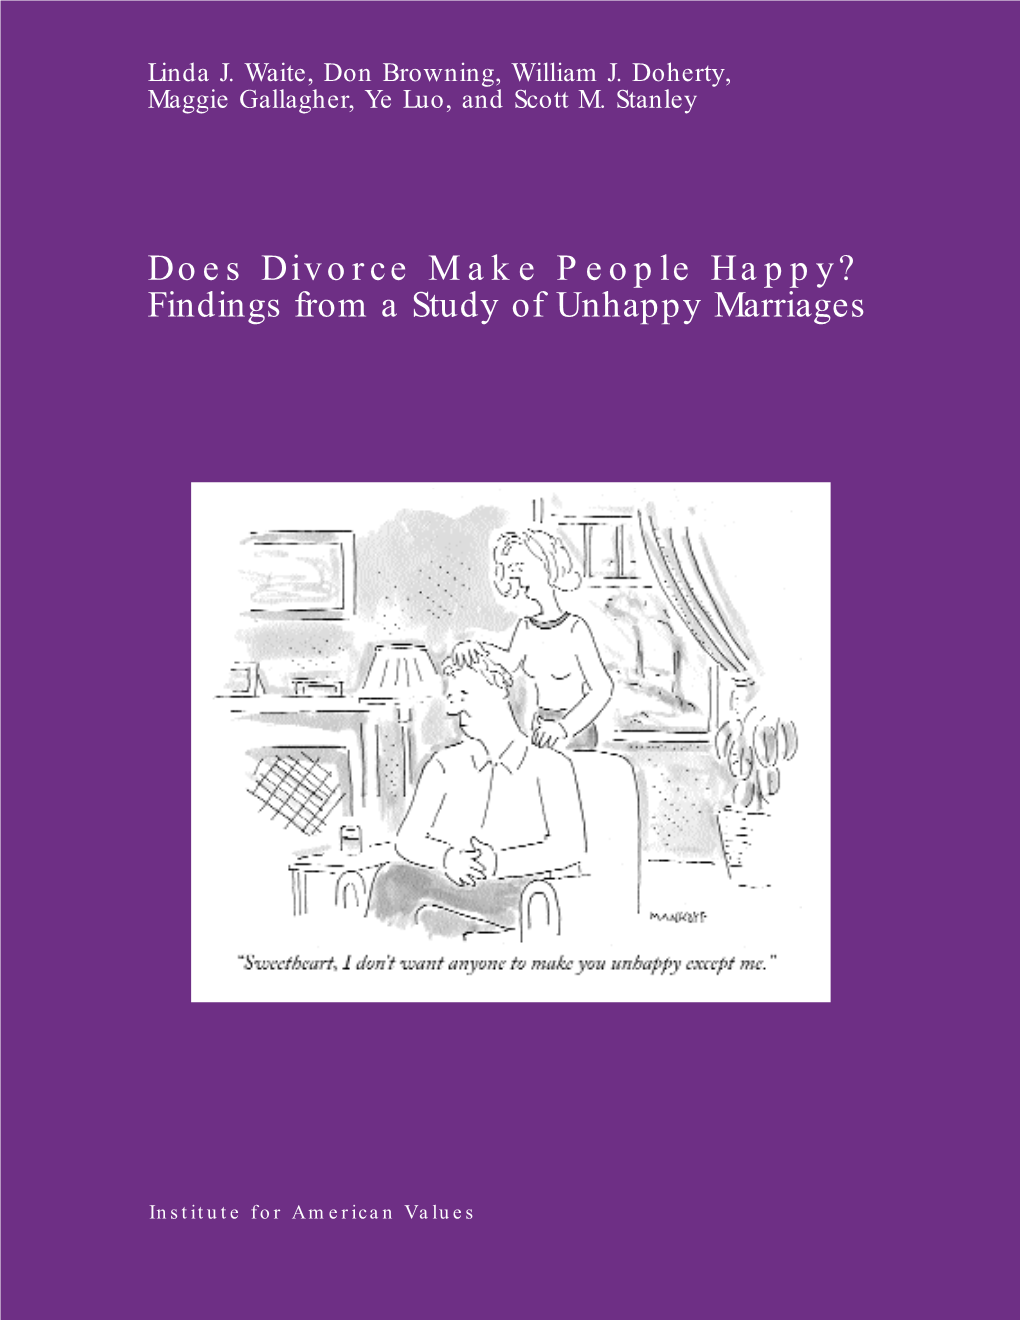 Does Divorce Make People Happy? Findings from a Study of Unhappy Marriages